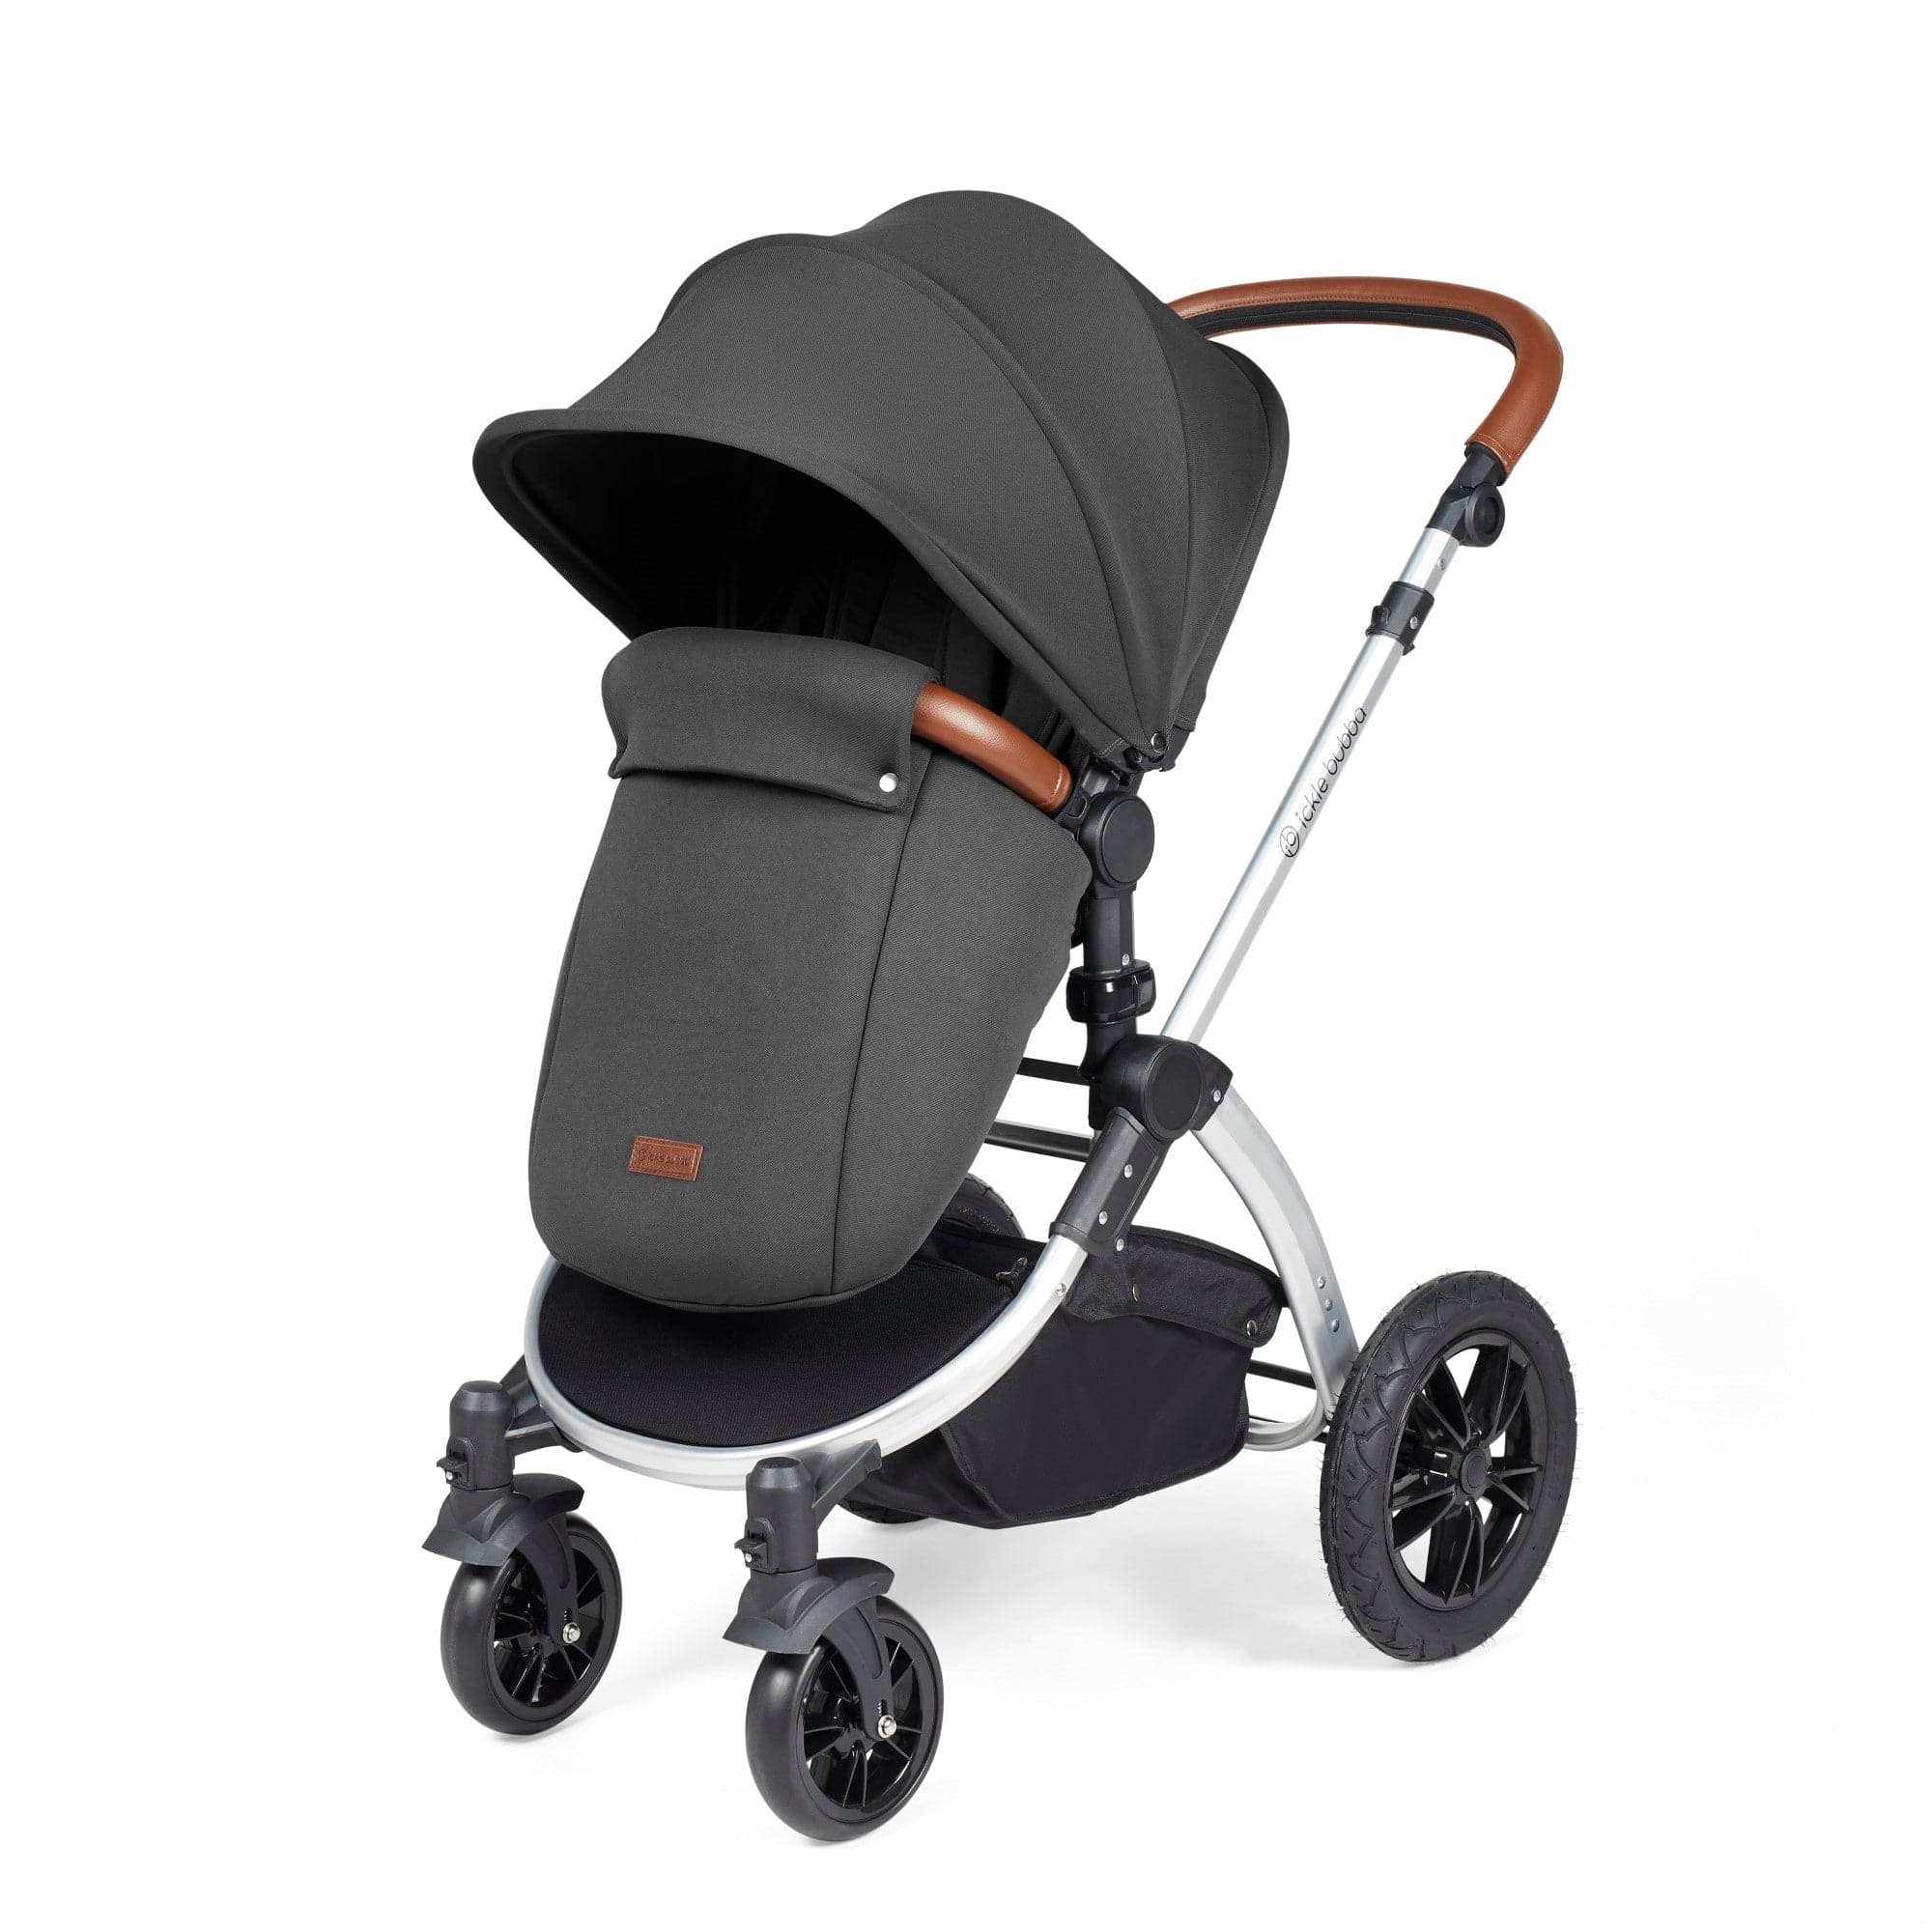 Ickle Bubba Stomp Luxe All-in-One I-Size Travel System With Isofix Base - Silver / Charcoal Grey / Tan -  | For Your Little One